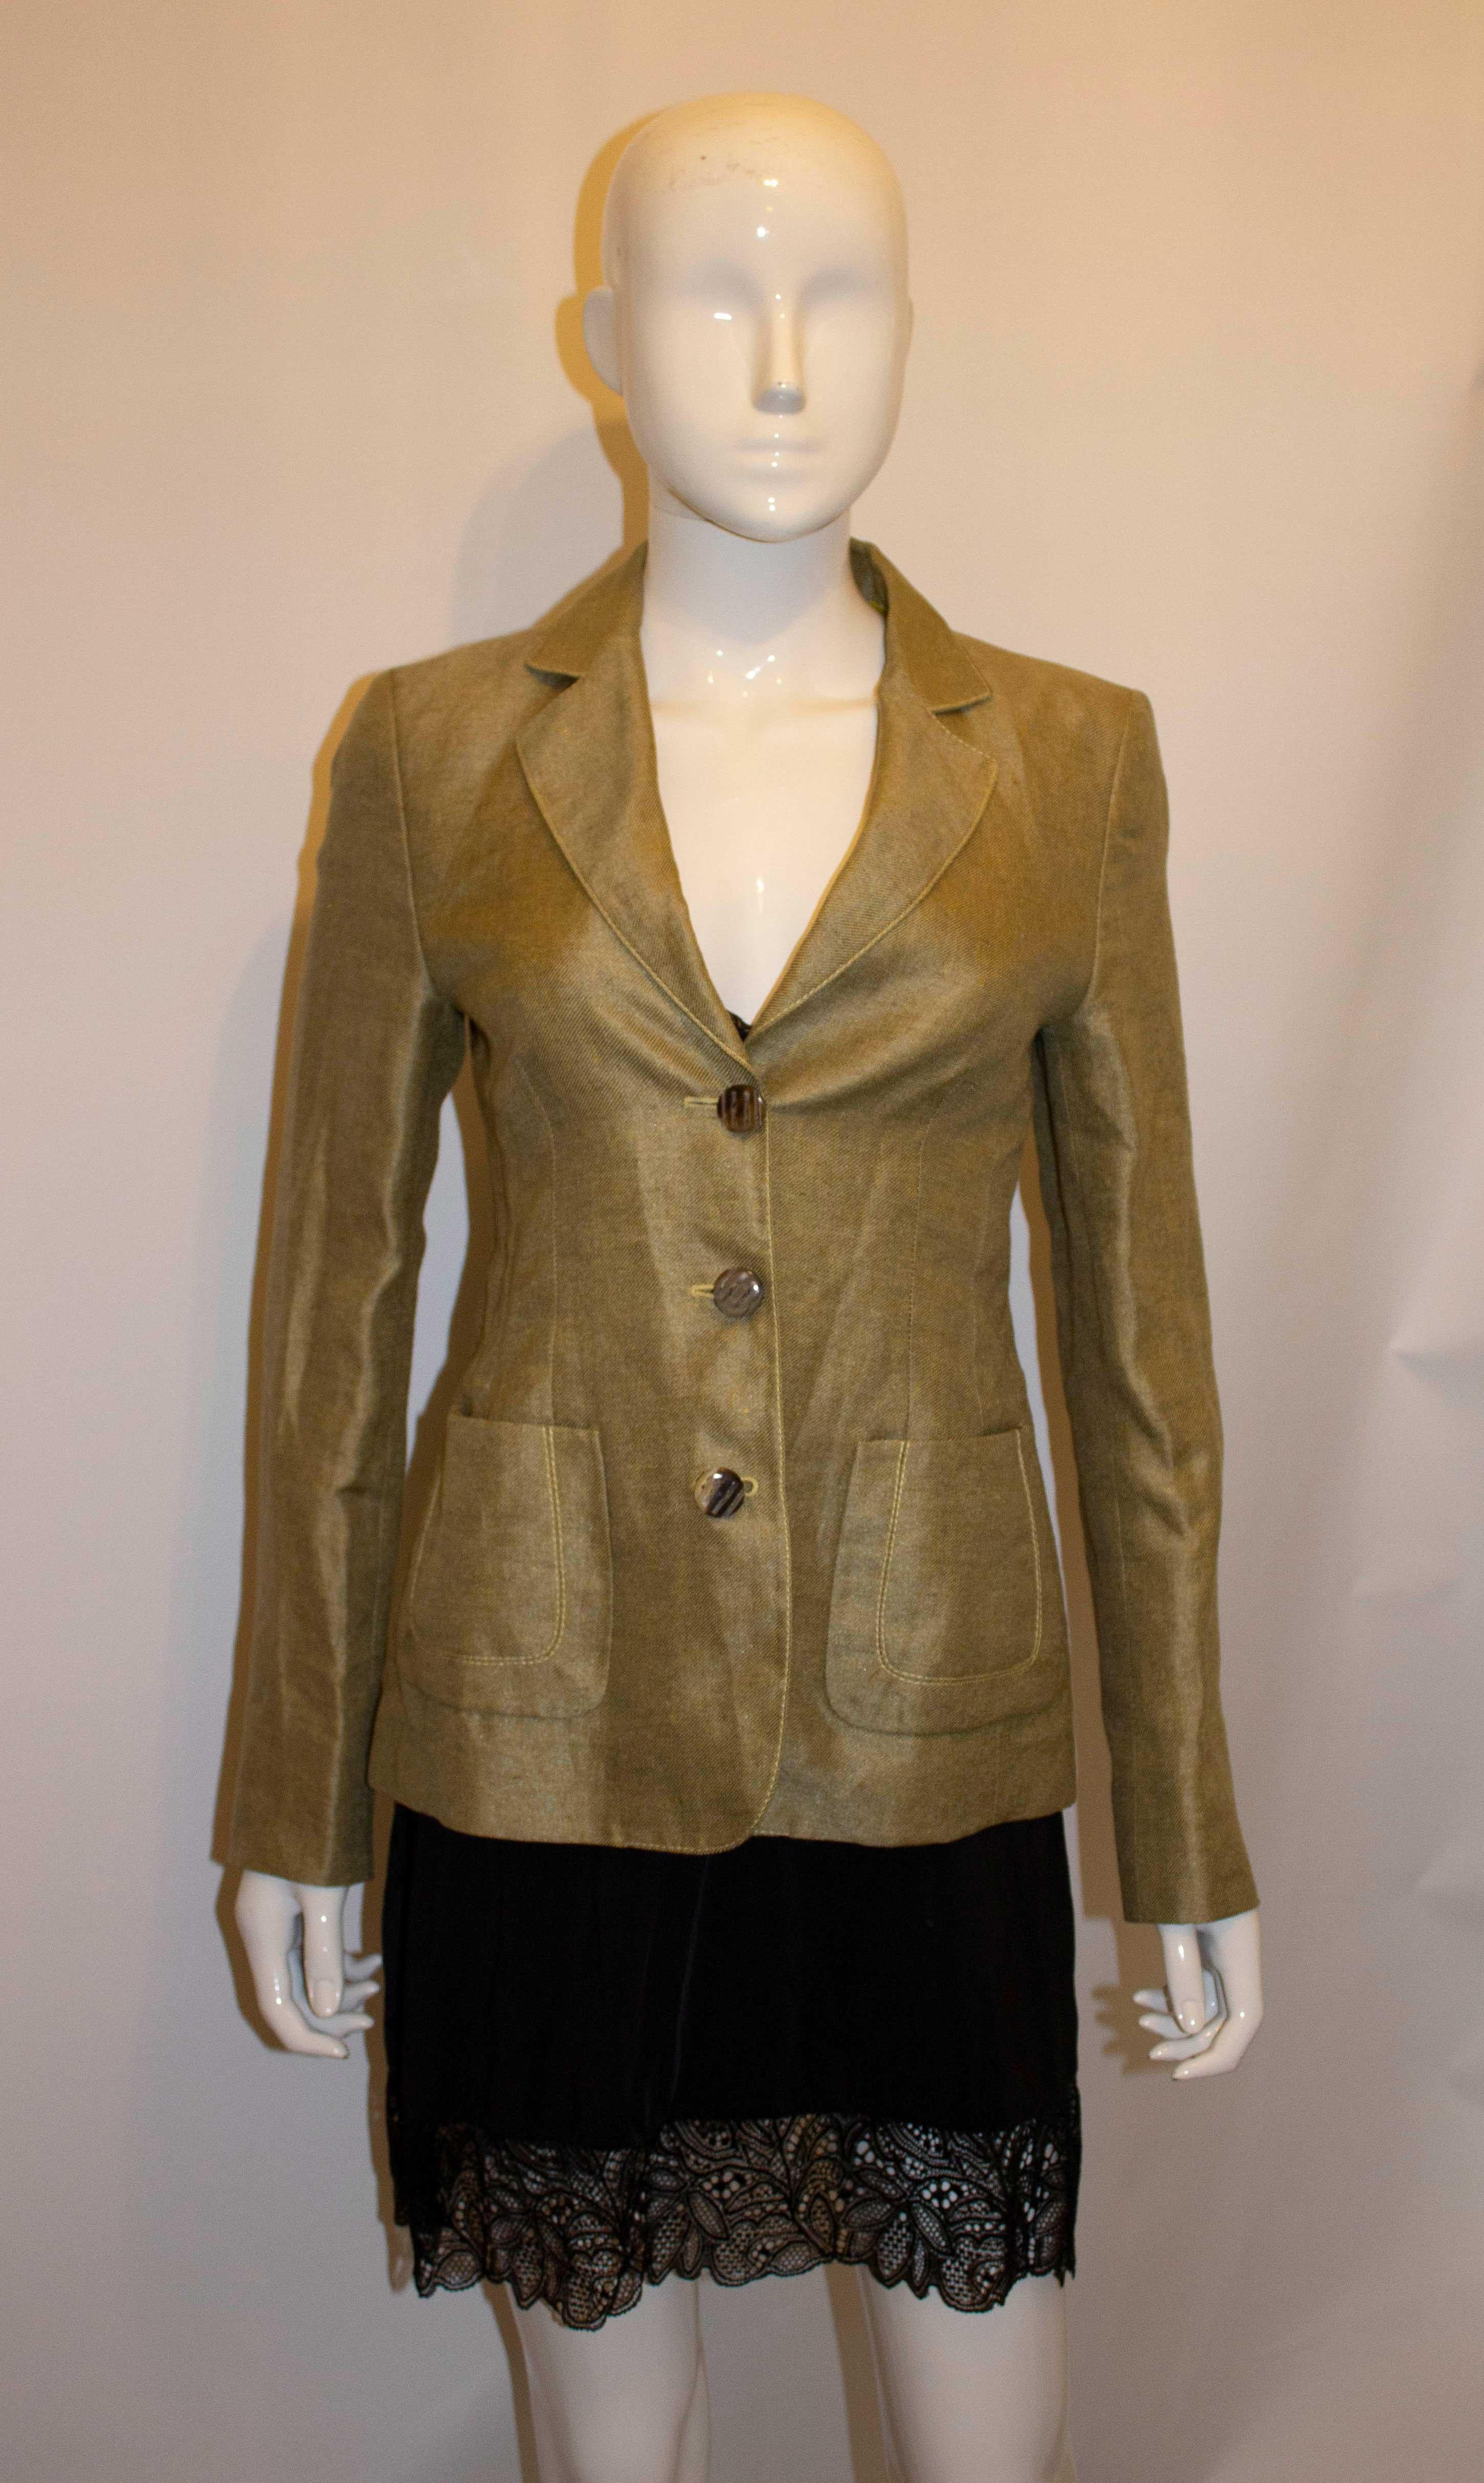 Wonderful Jacket by Italian Luxury Firm Agnona In Good Condition For Sale In London, GB